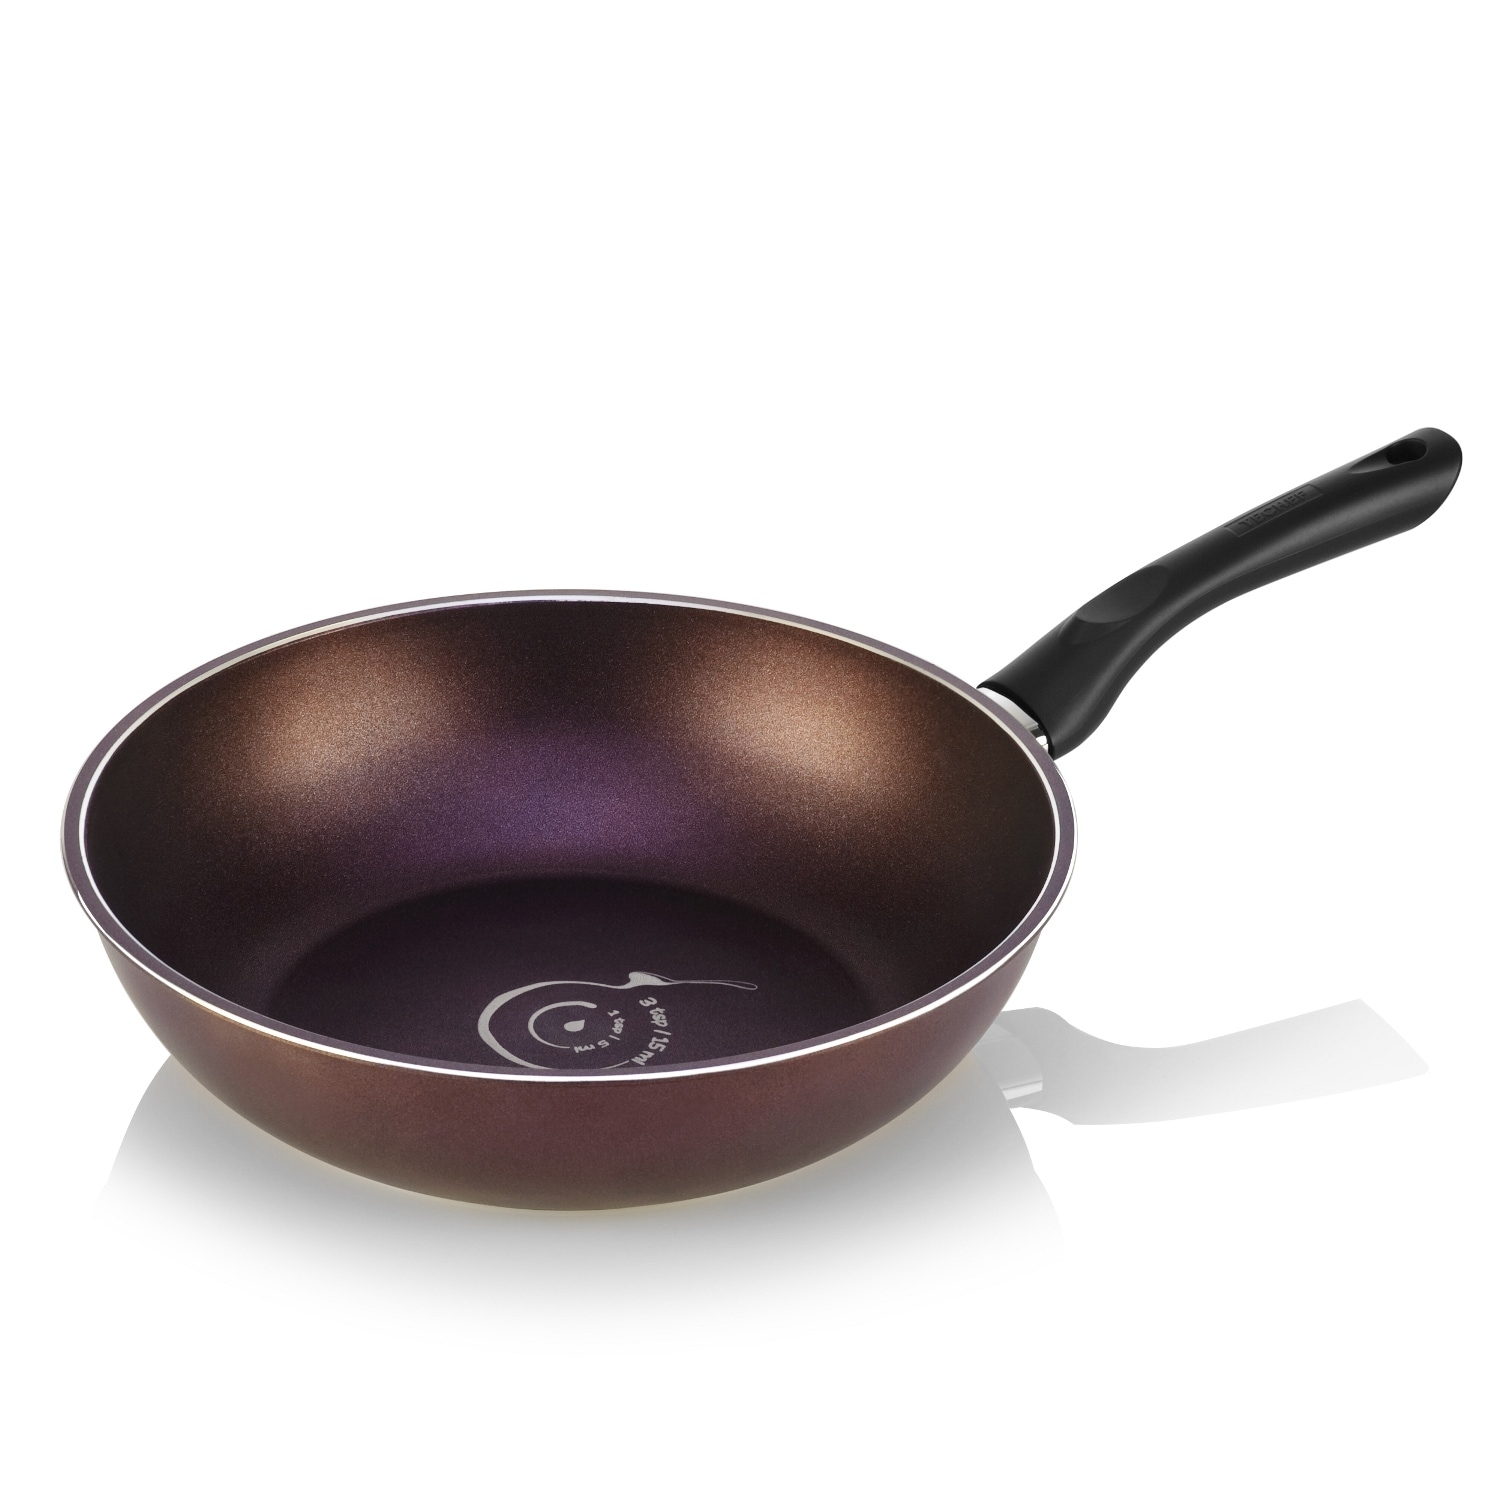 TECHEF Art Collection - 12 Inch Wok/Stir-Fry Pan with Cover - Bed